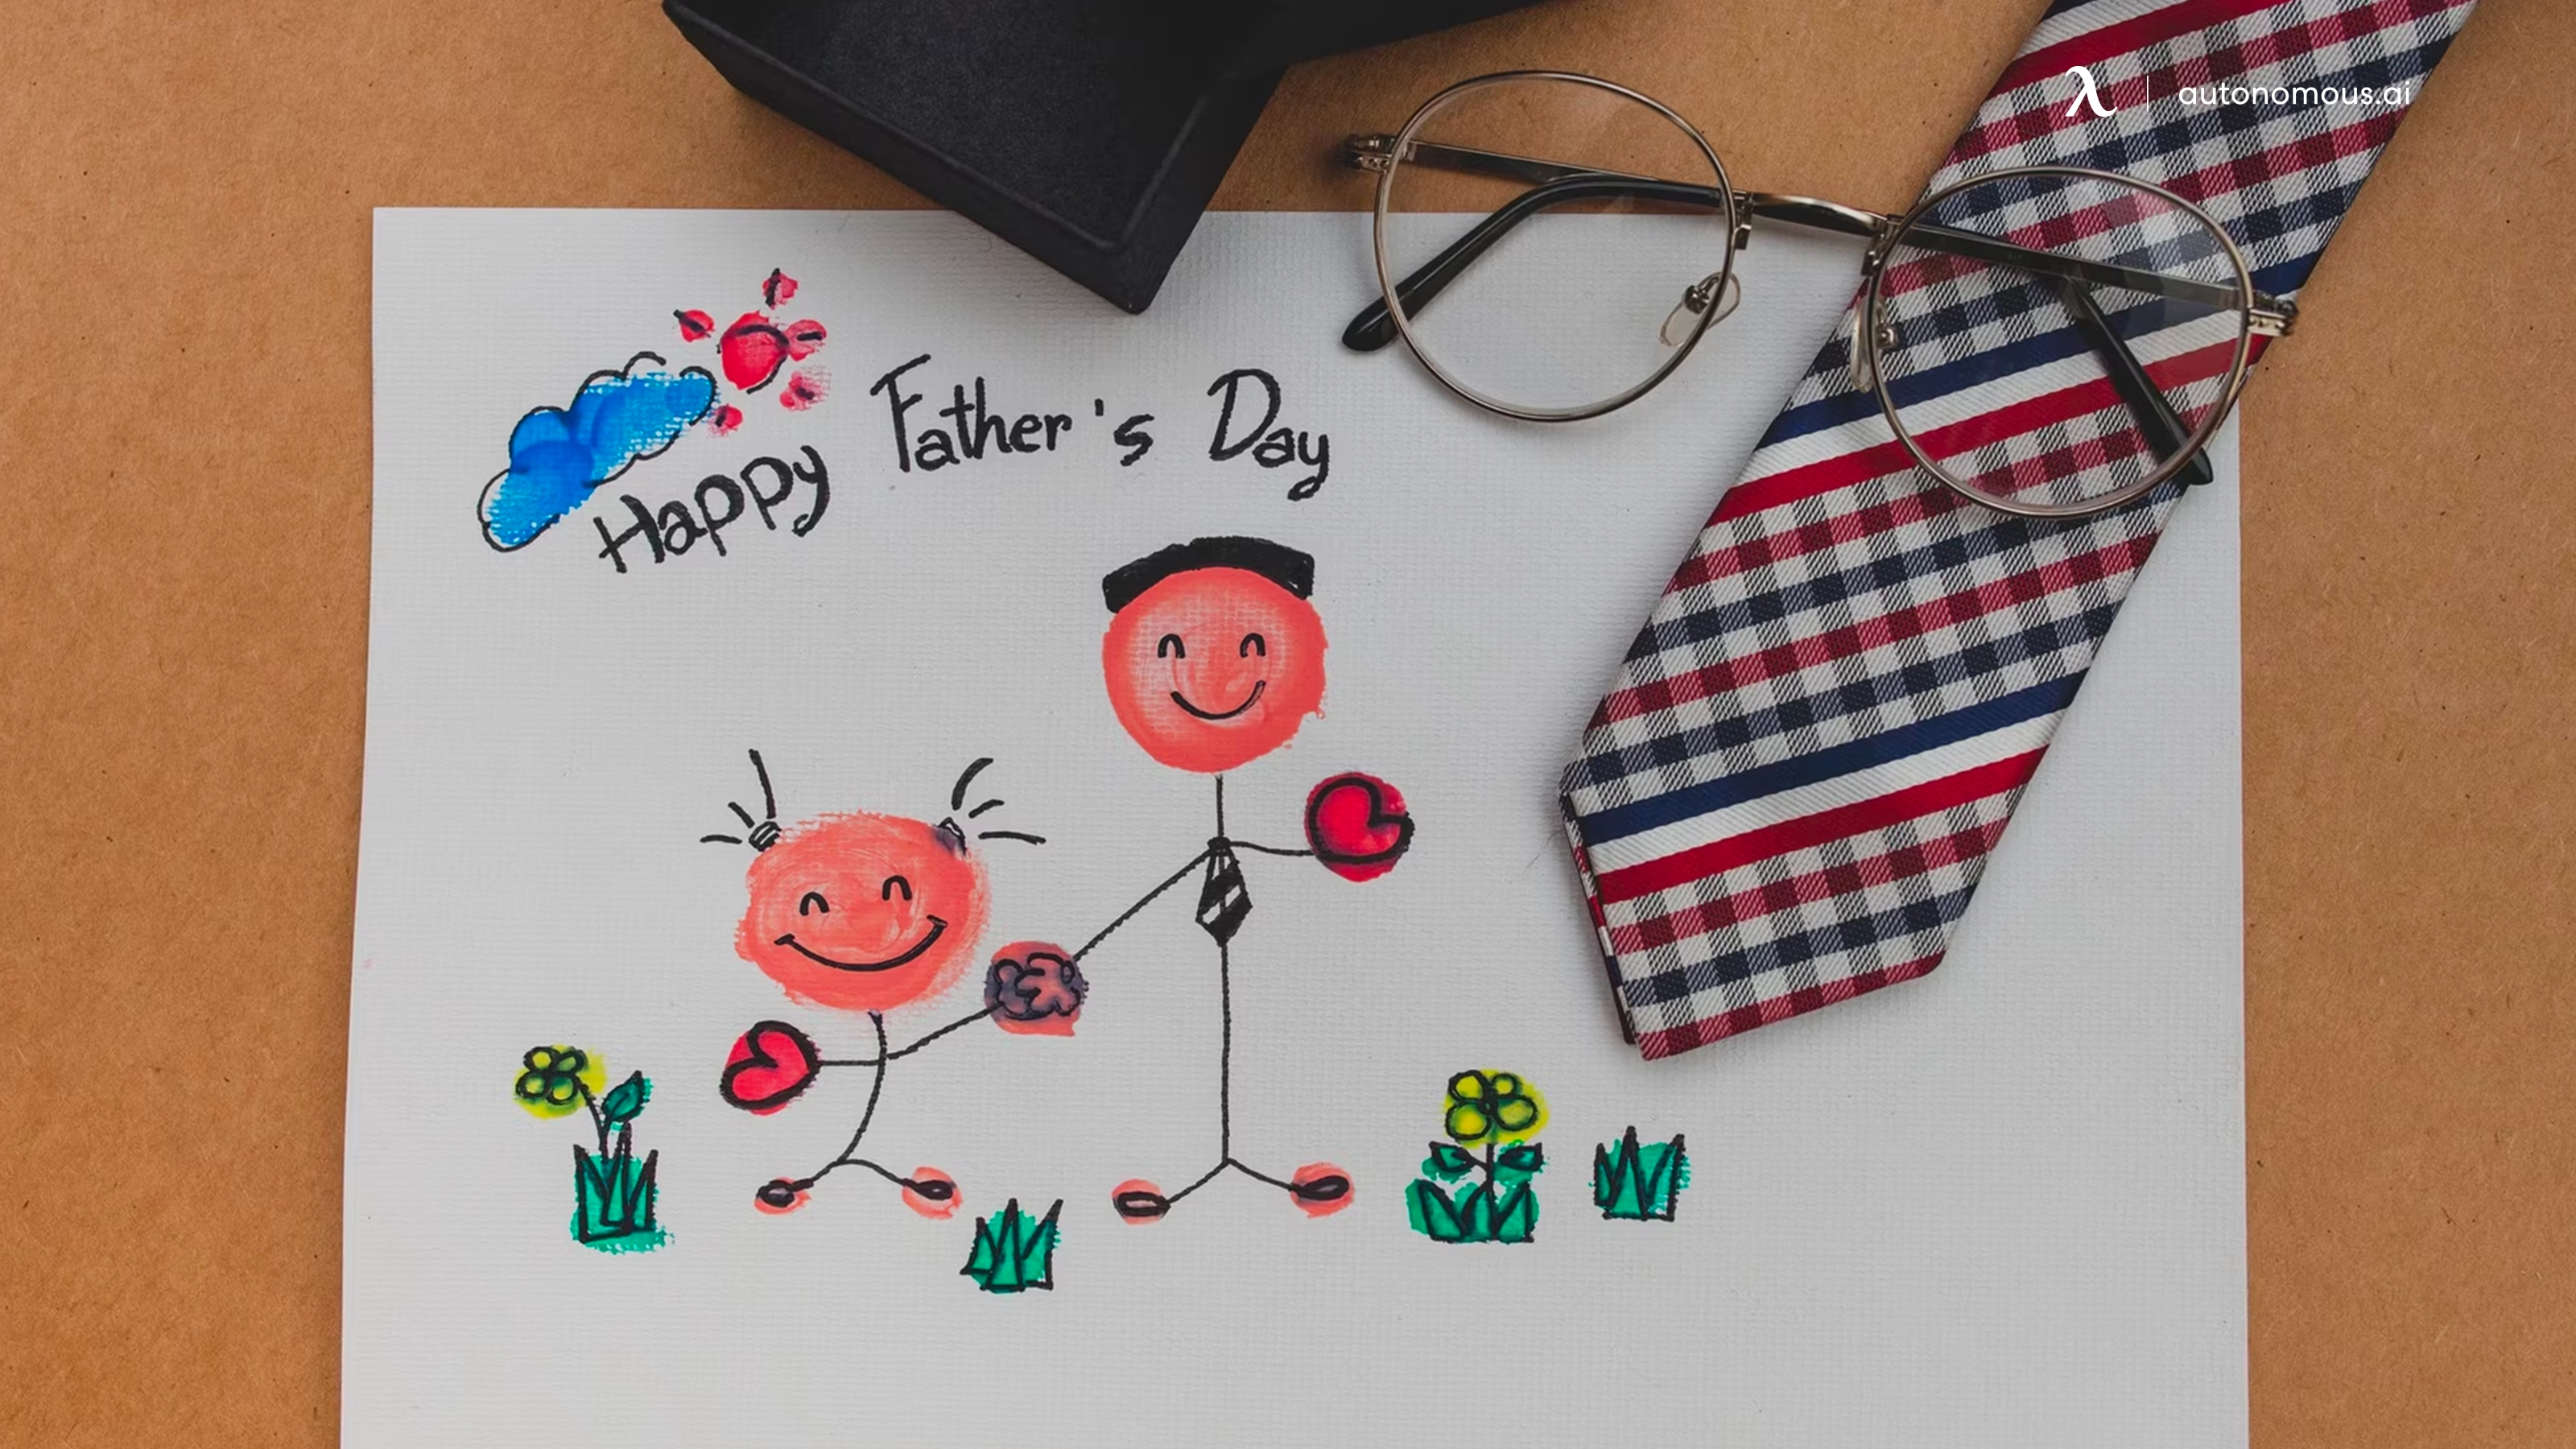 What Is The Best Gift a Son Can Give to His Father on His Day?